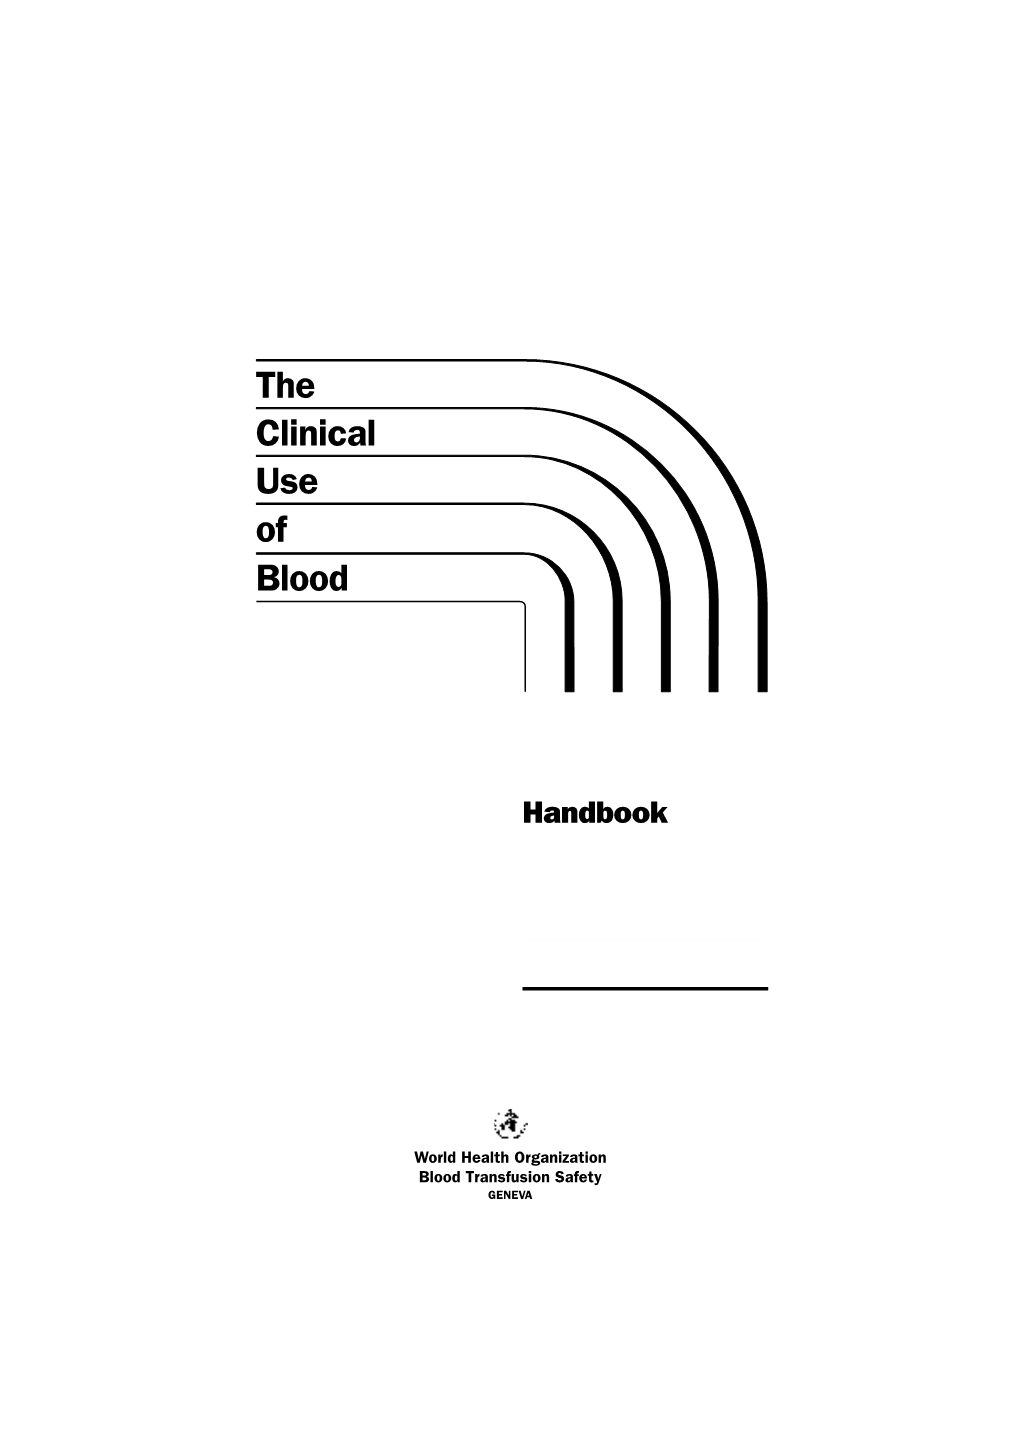 The Clinical Use of Blood Handbook